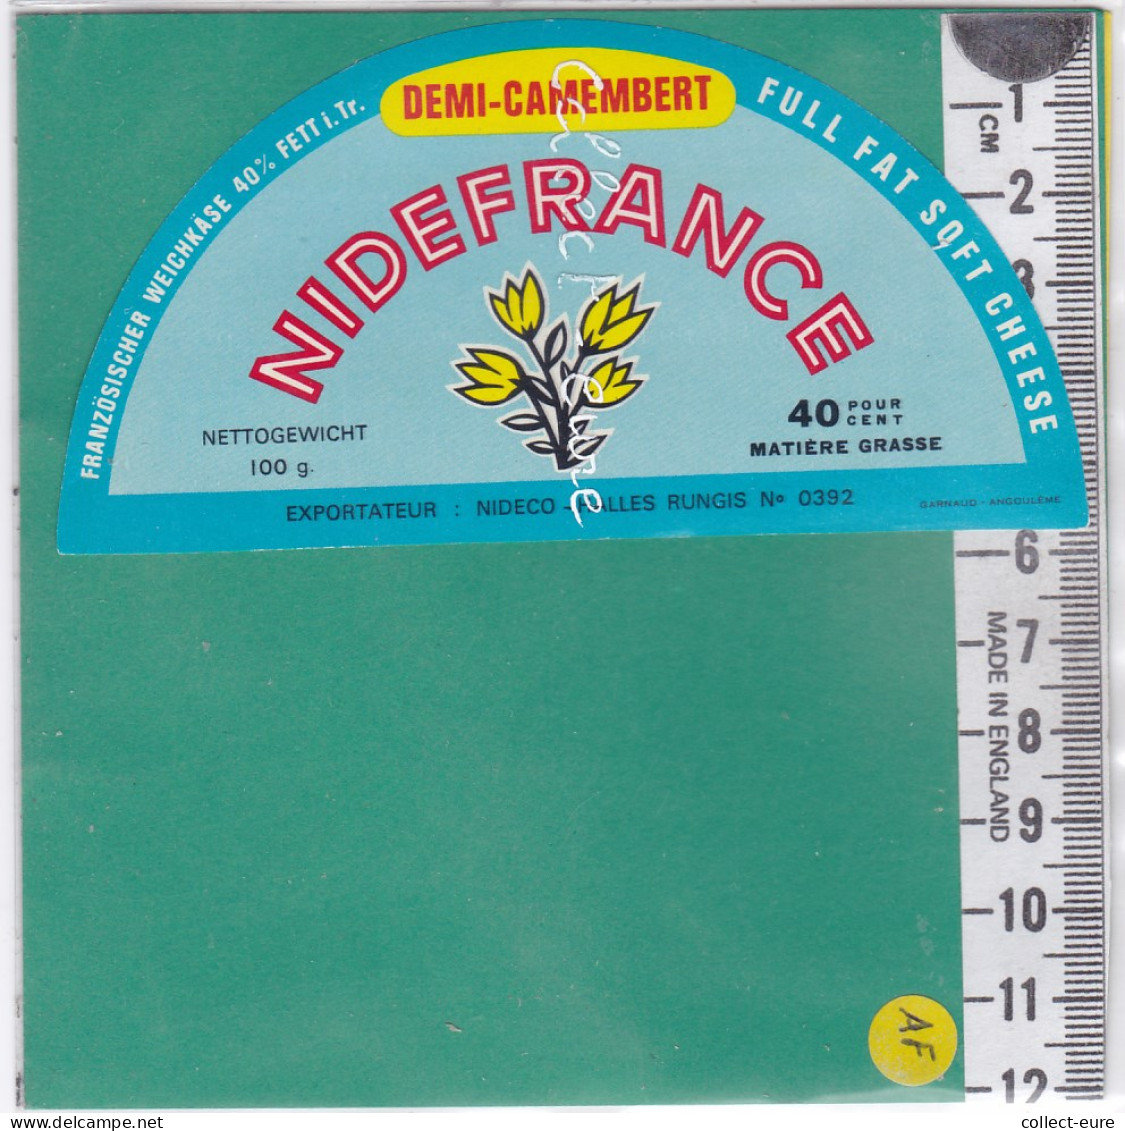 C1165 FROMAGE DEMI CAMEMBERT NID DE FRANCE NIDECO - Cheese